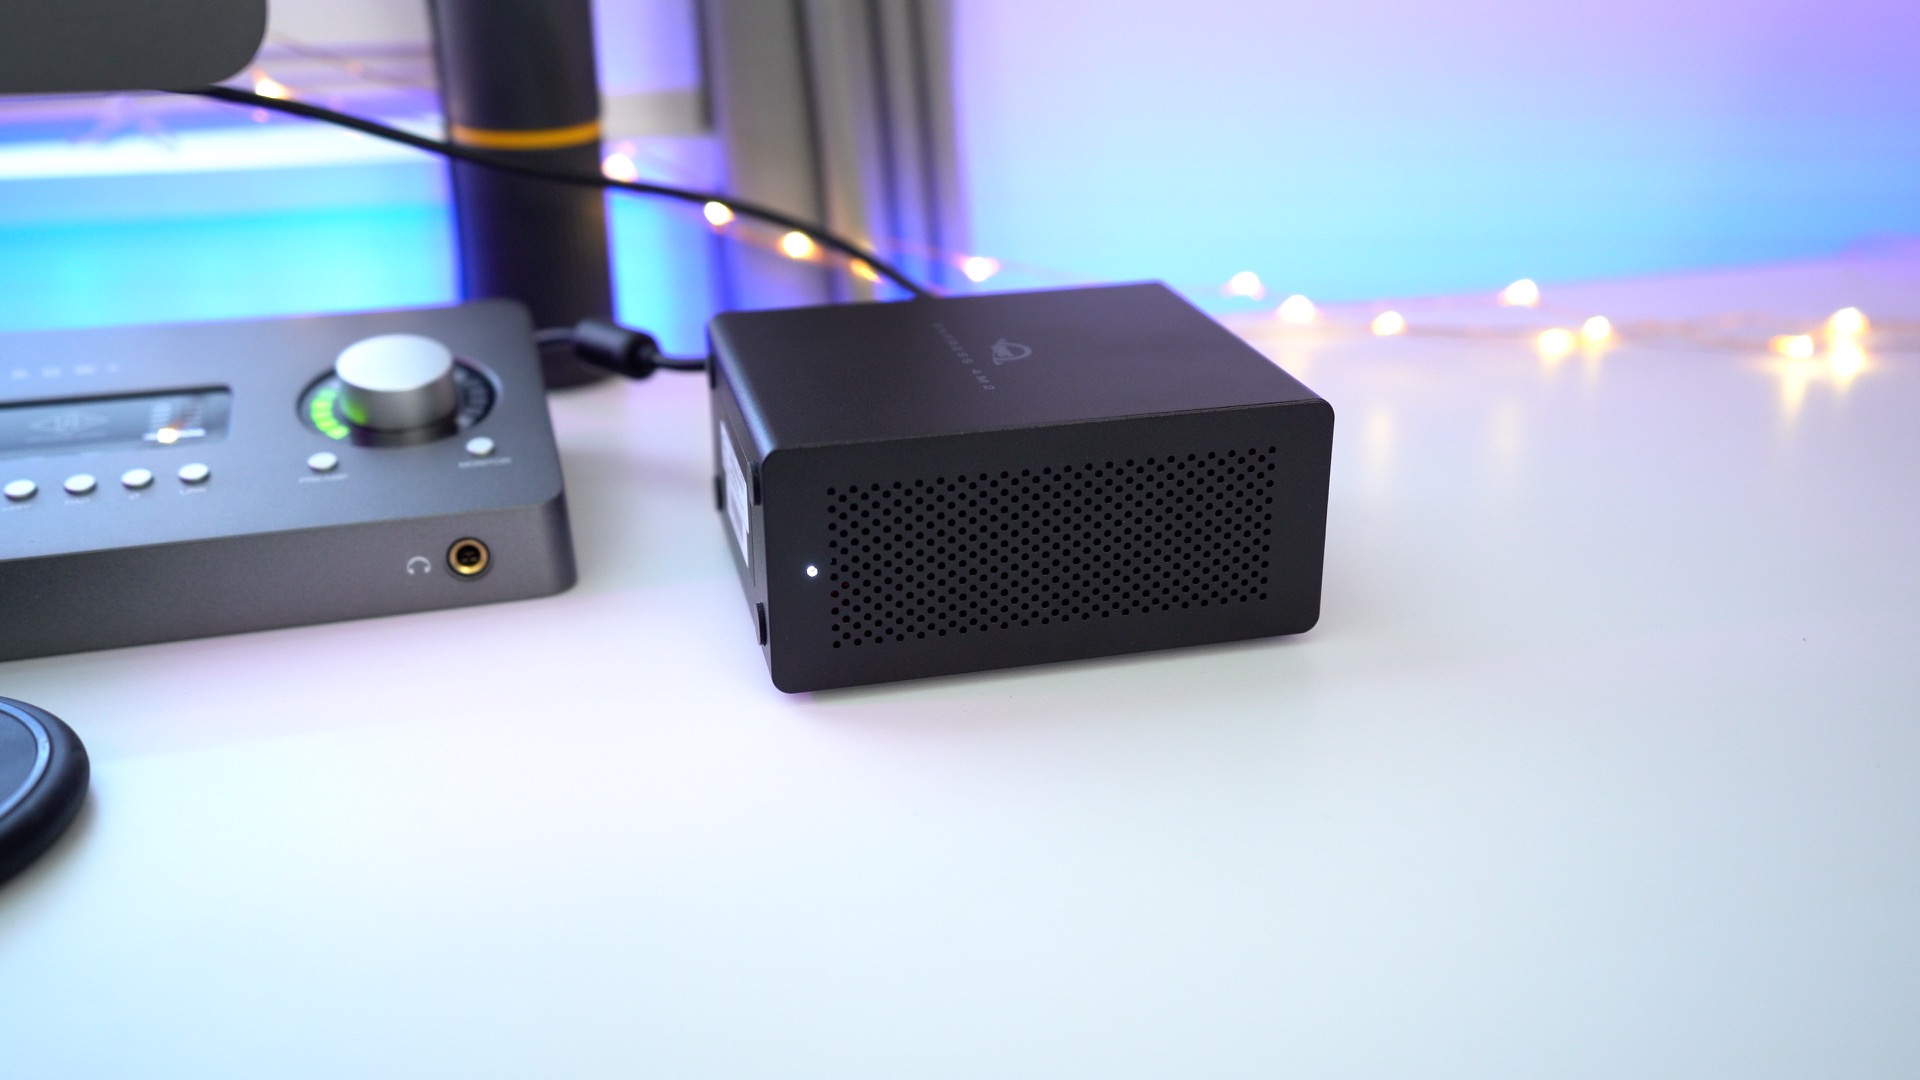 Review: OWC's Express 4M2 Thunderbolt 3 enclosure accommodates